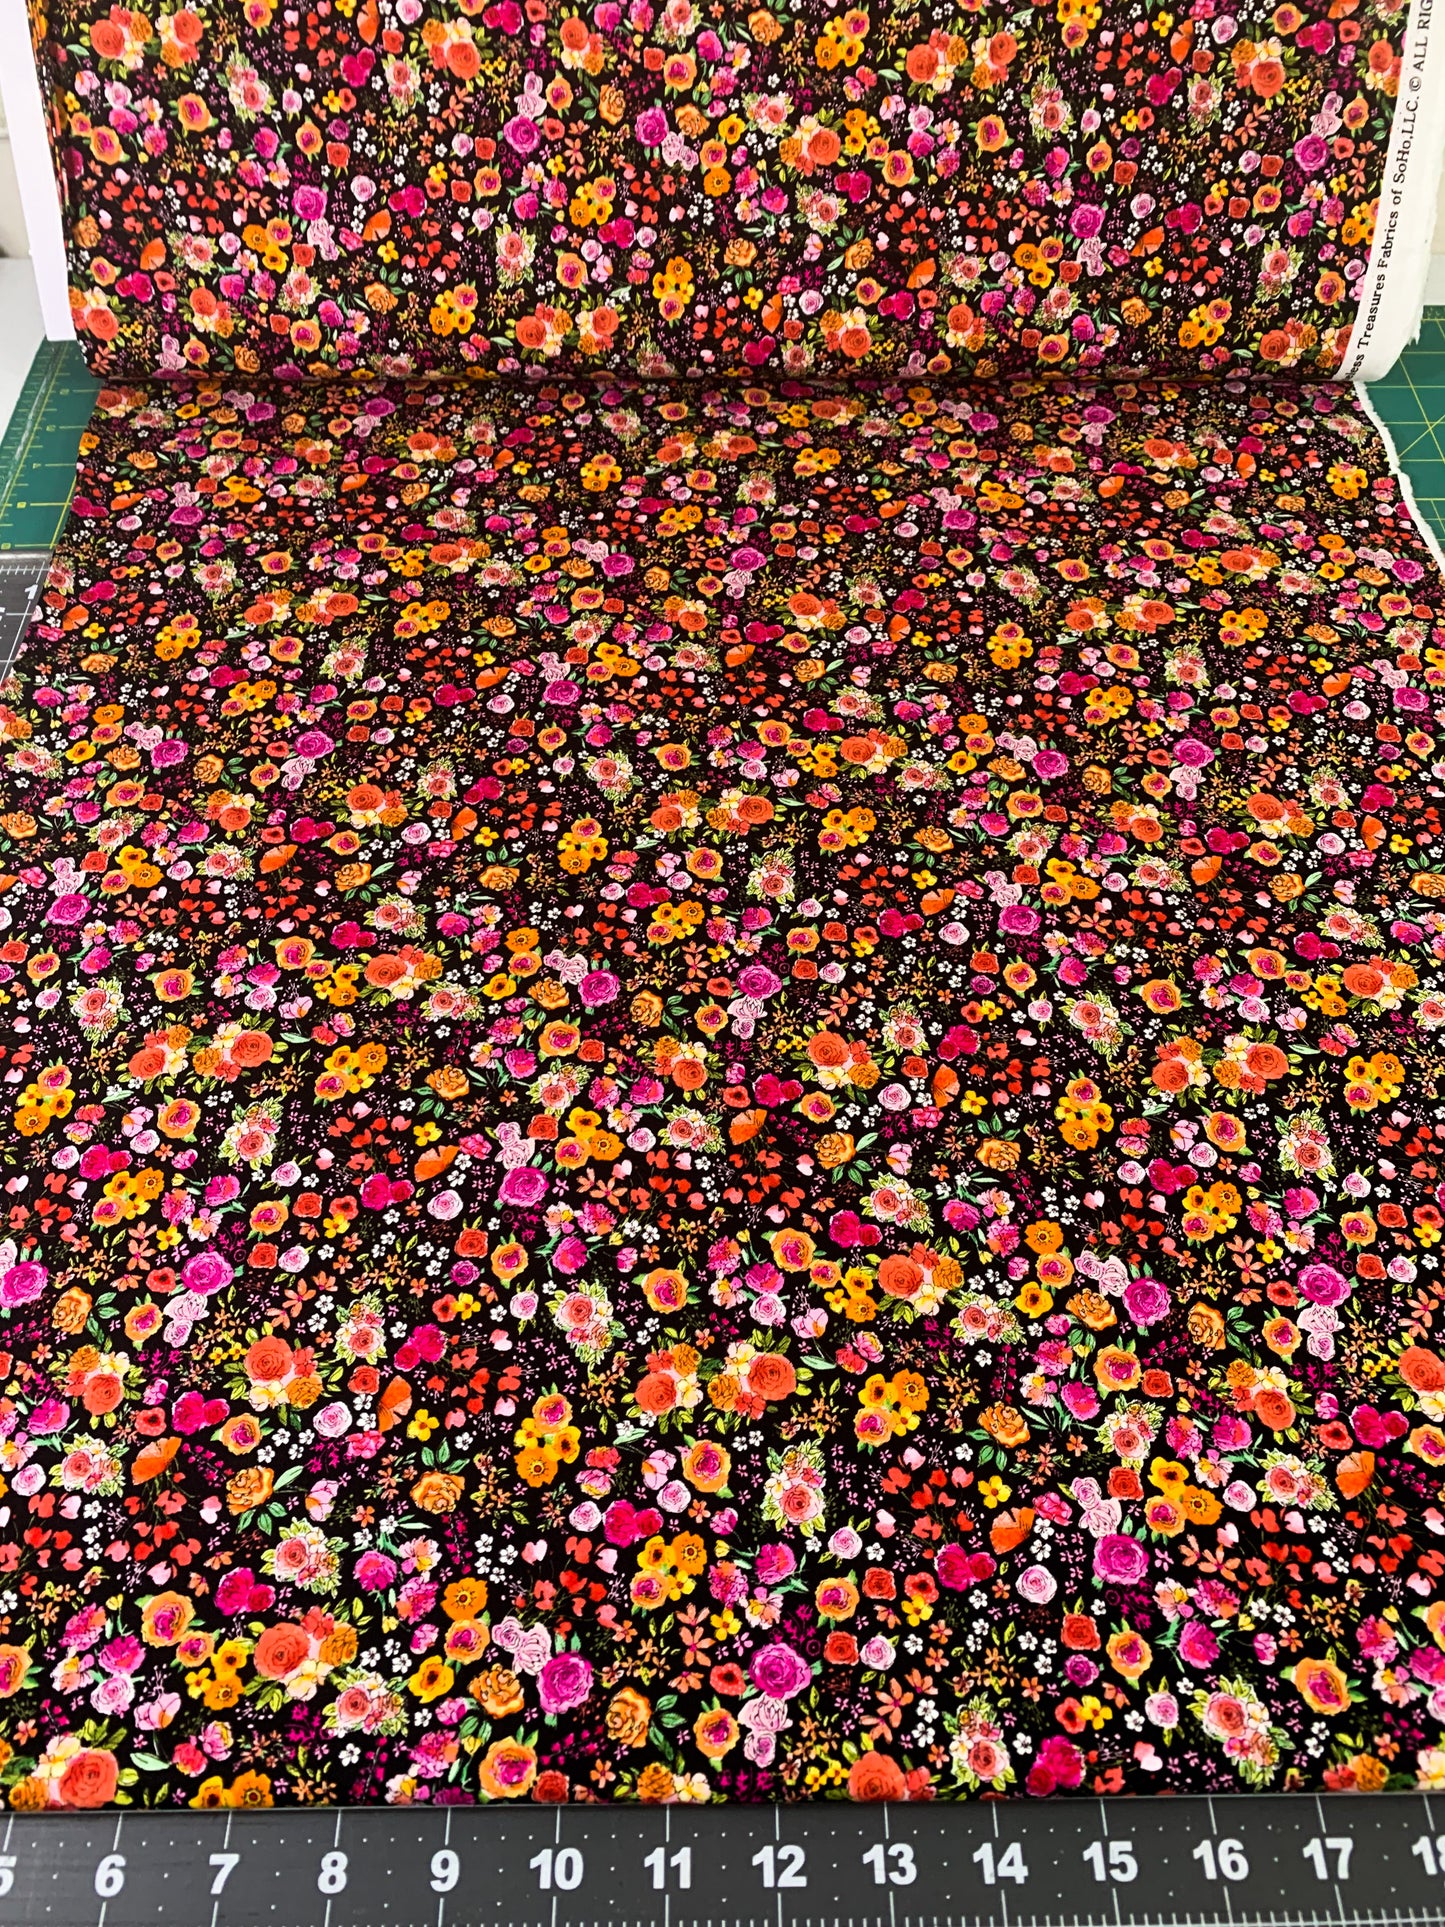 Orange and Pink flower fabric C8934 Gail floral fabric